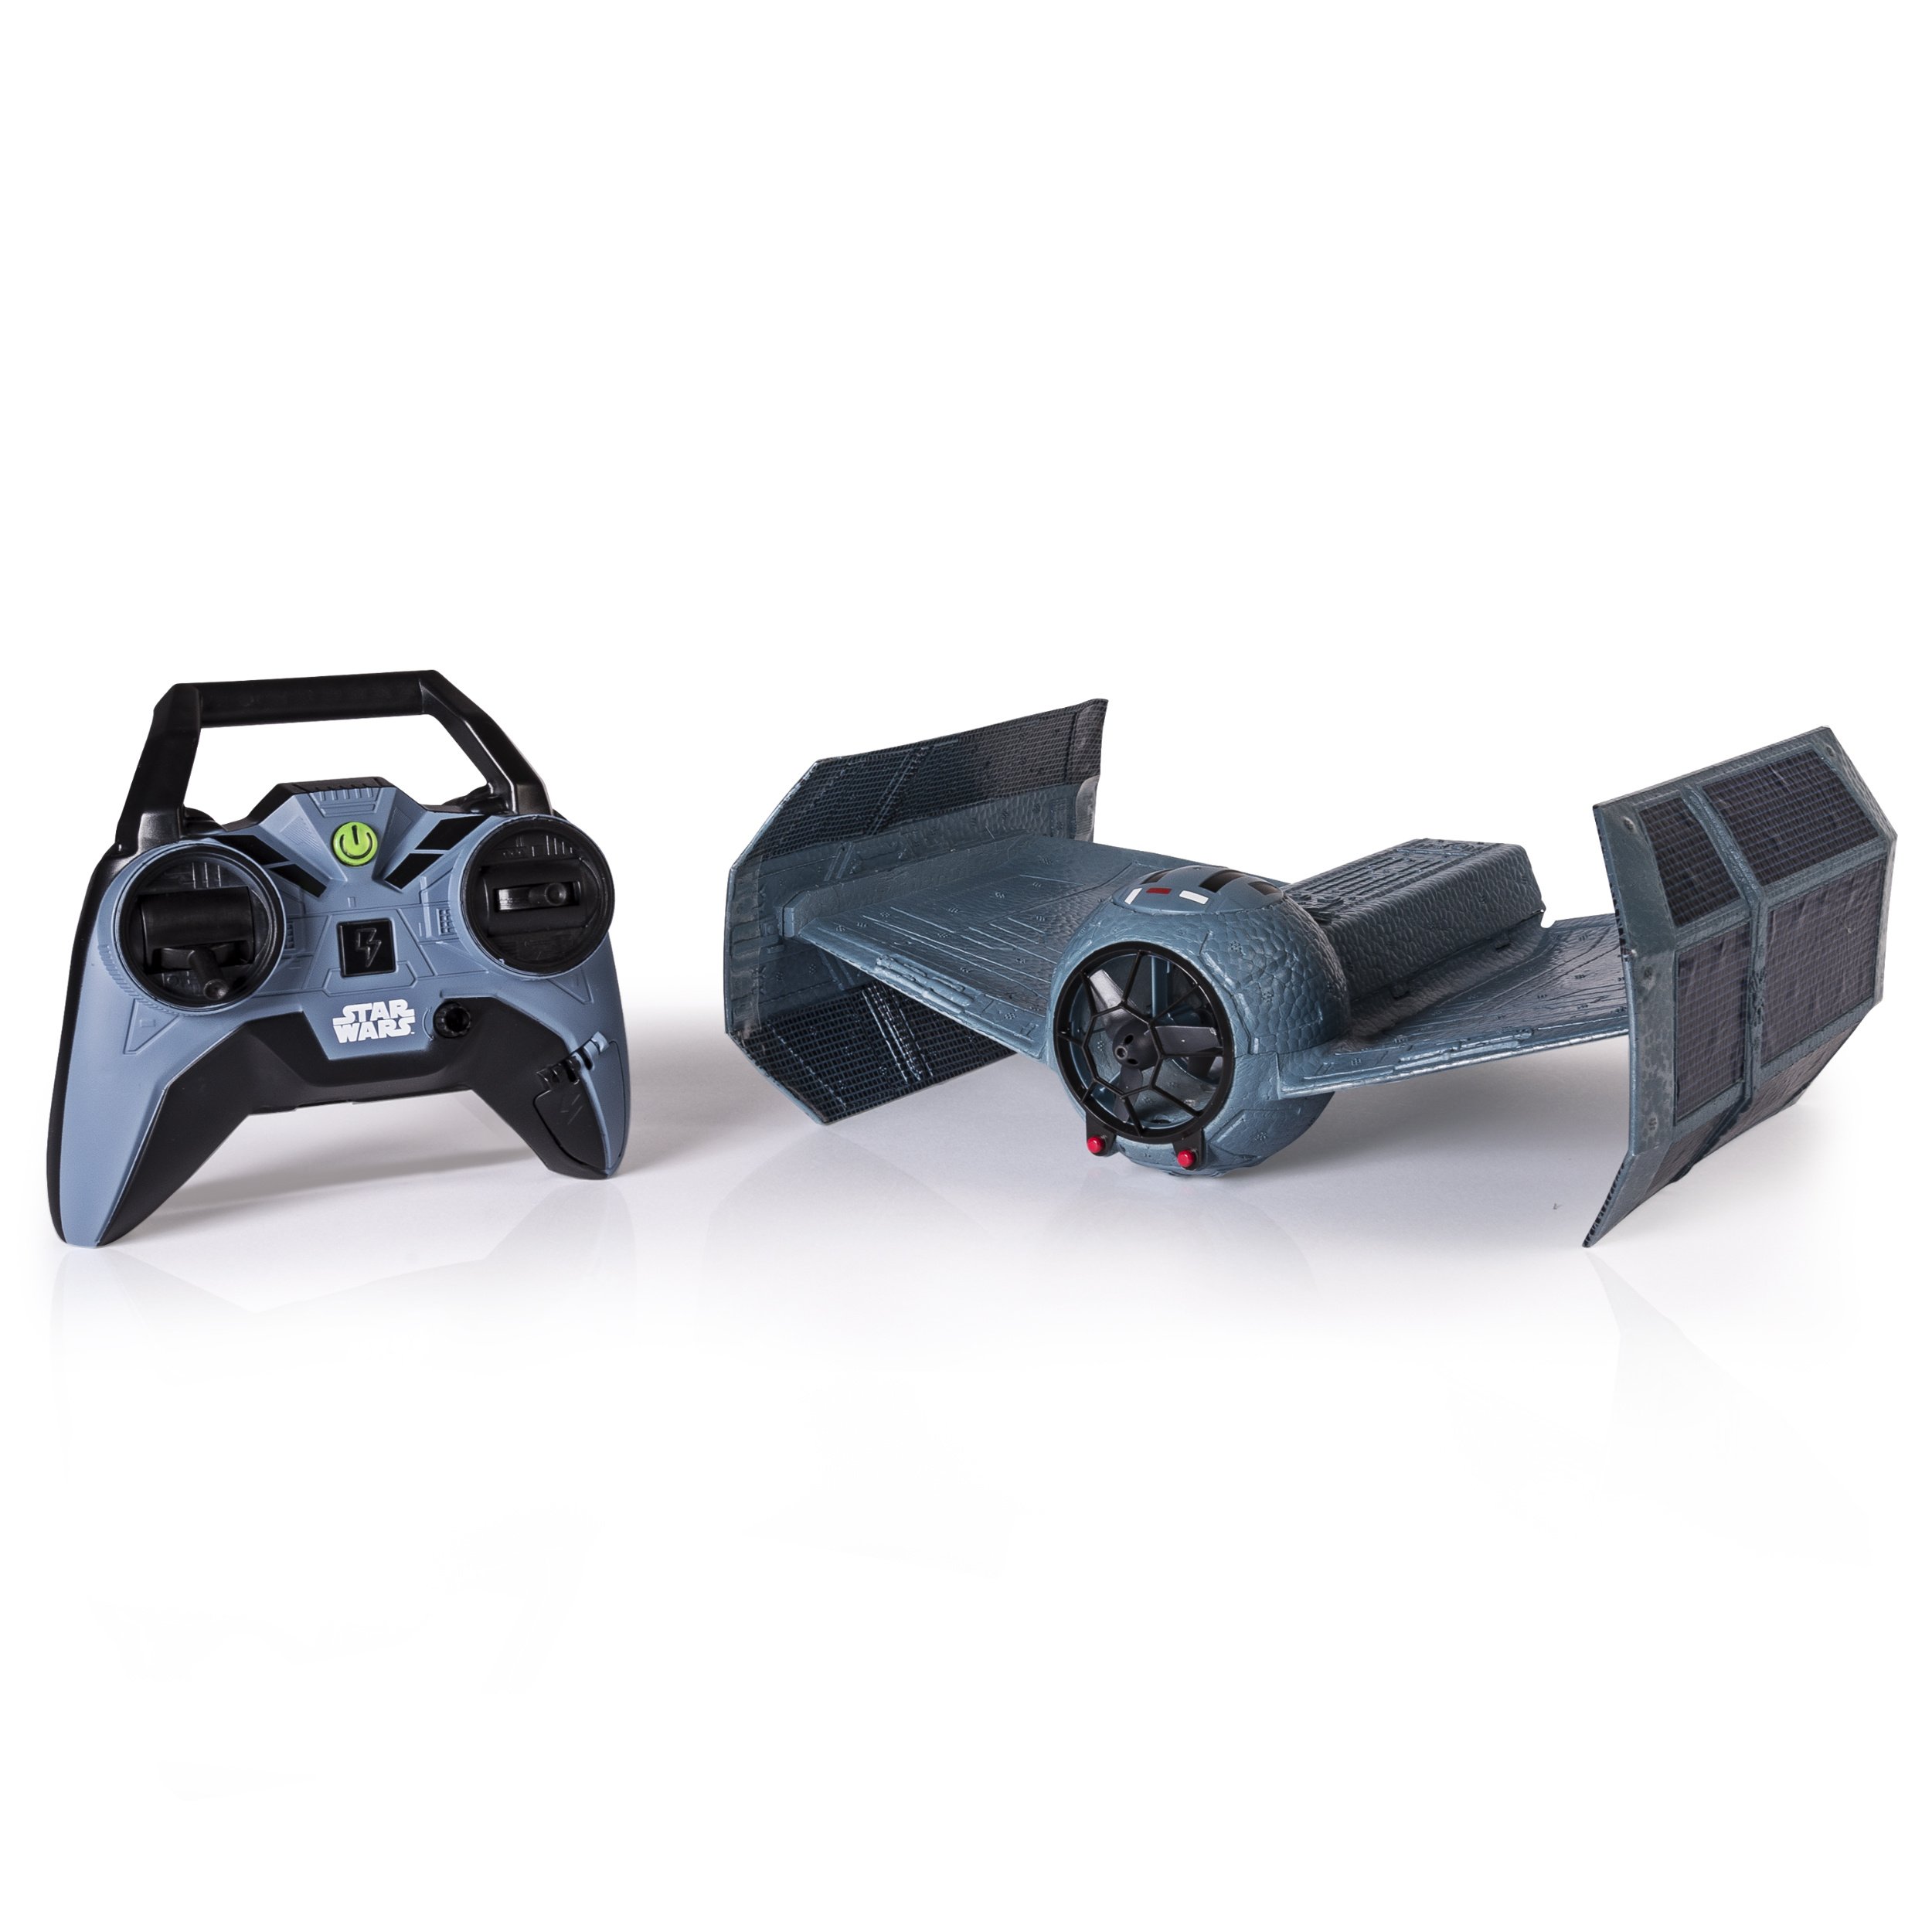 Air Hogs Star Wars Rouge1 Tie Fighter Advance Vehicle